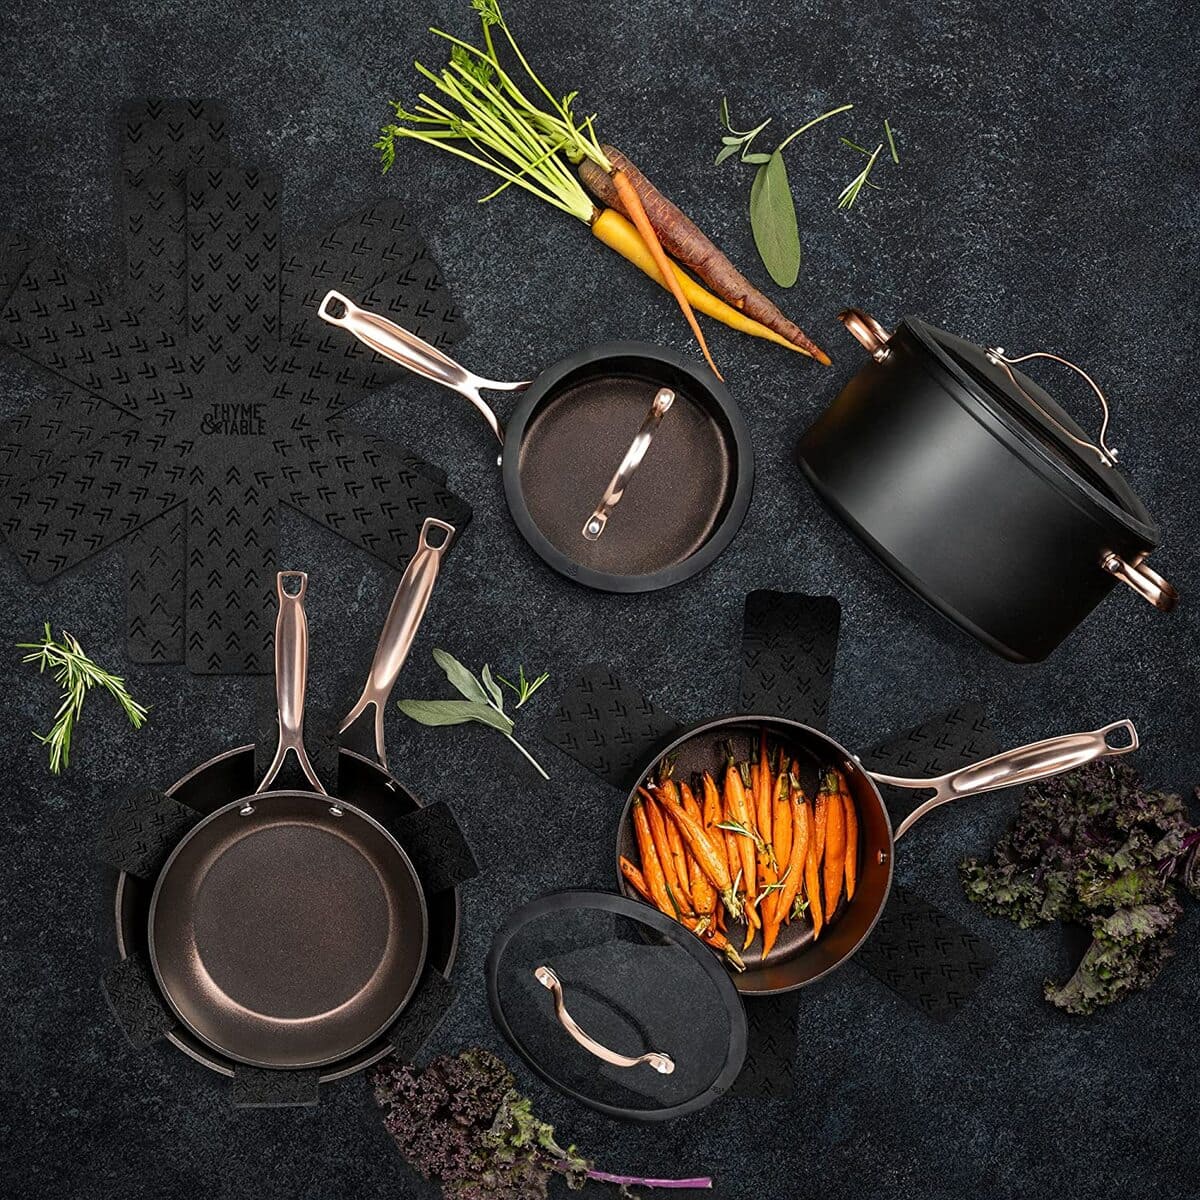 Where Is Thyme And Table Cookware Made